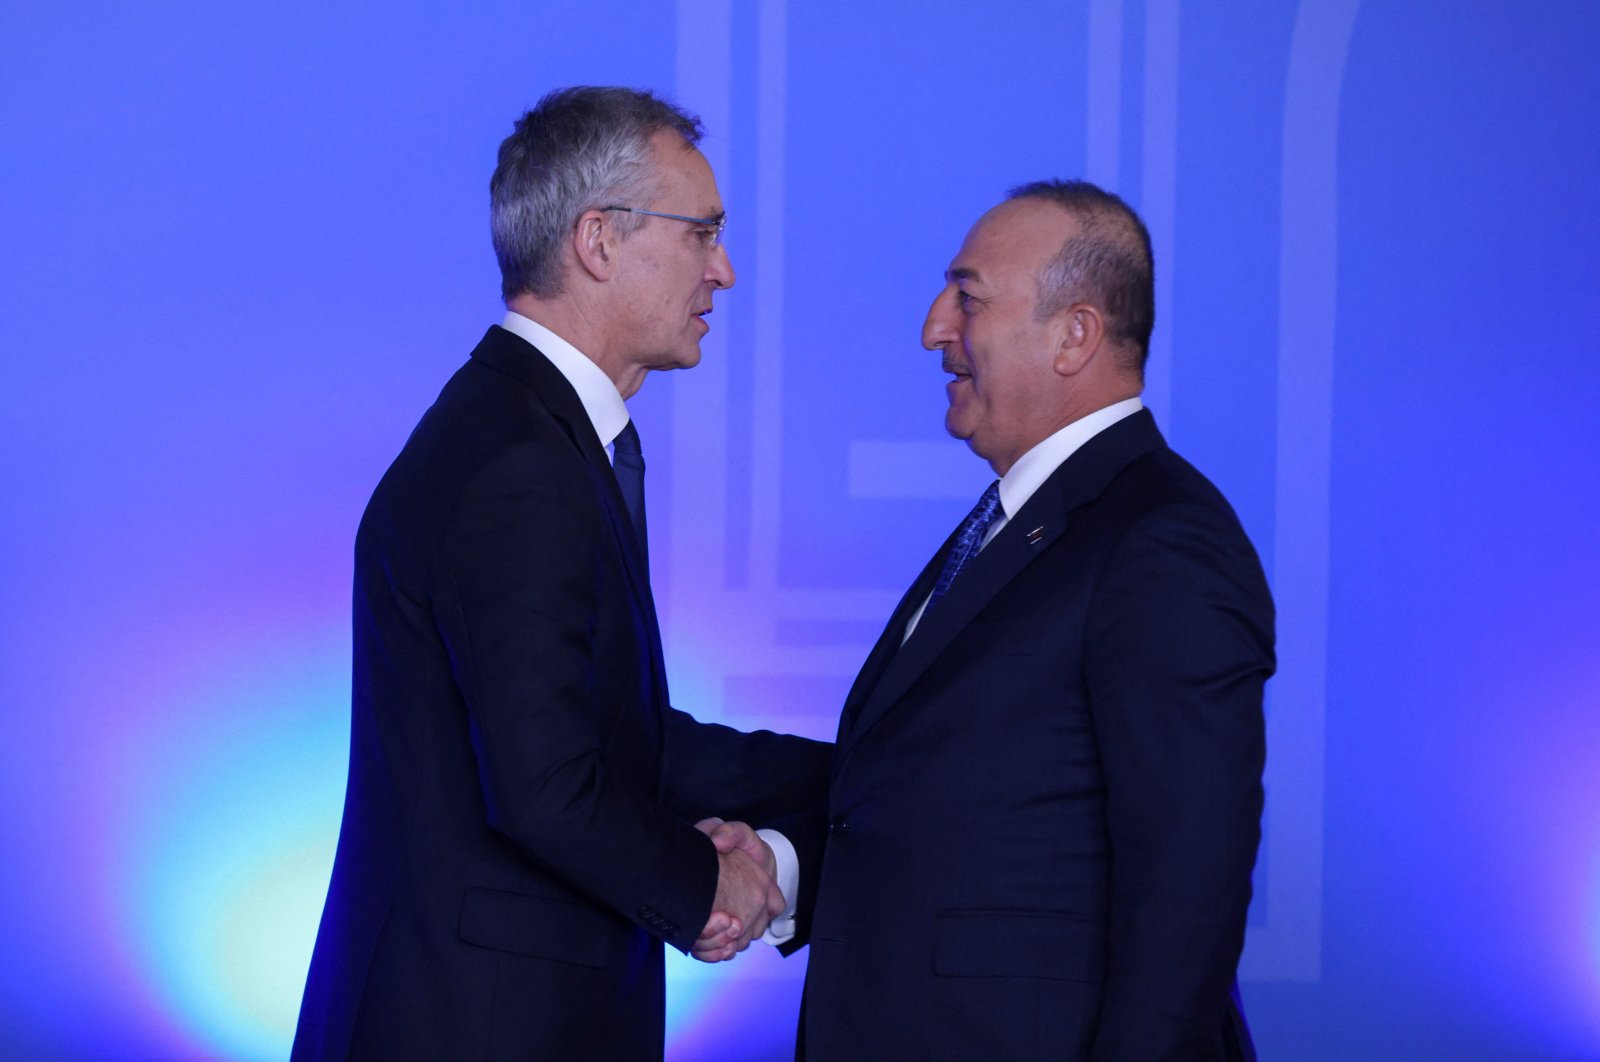 NATO Secretary-General Jens Stoltenberg (L) shakes hands with Foreign Minister Mevlüt Çavuşoğlu (R) at the NATO foreign ministers meeting in Bucharest, Romania, Nov. 29, 2022. (Reuters Photo)